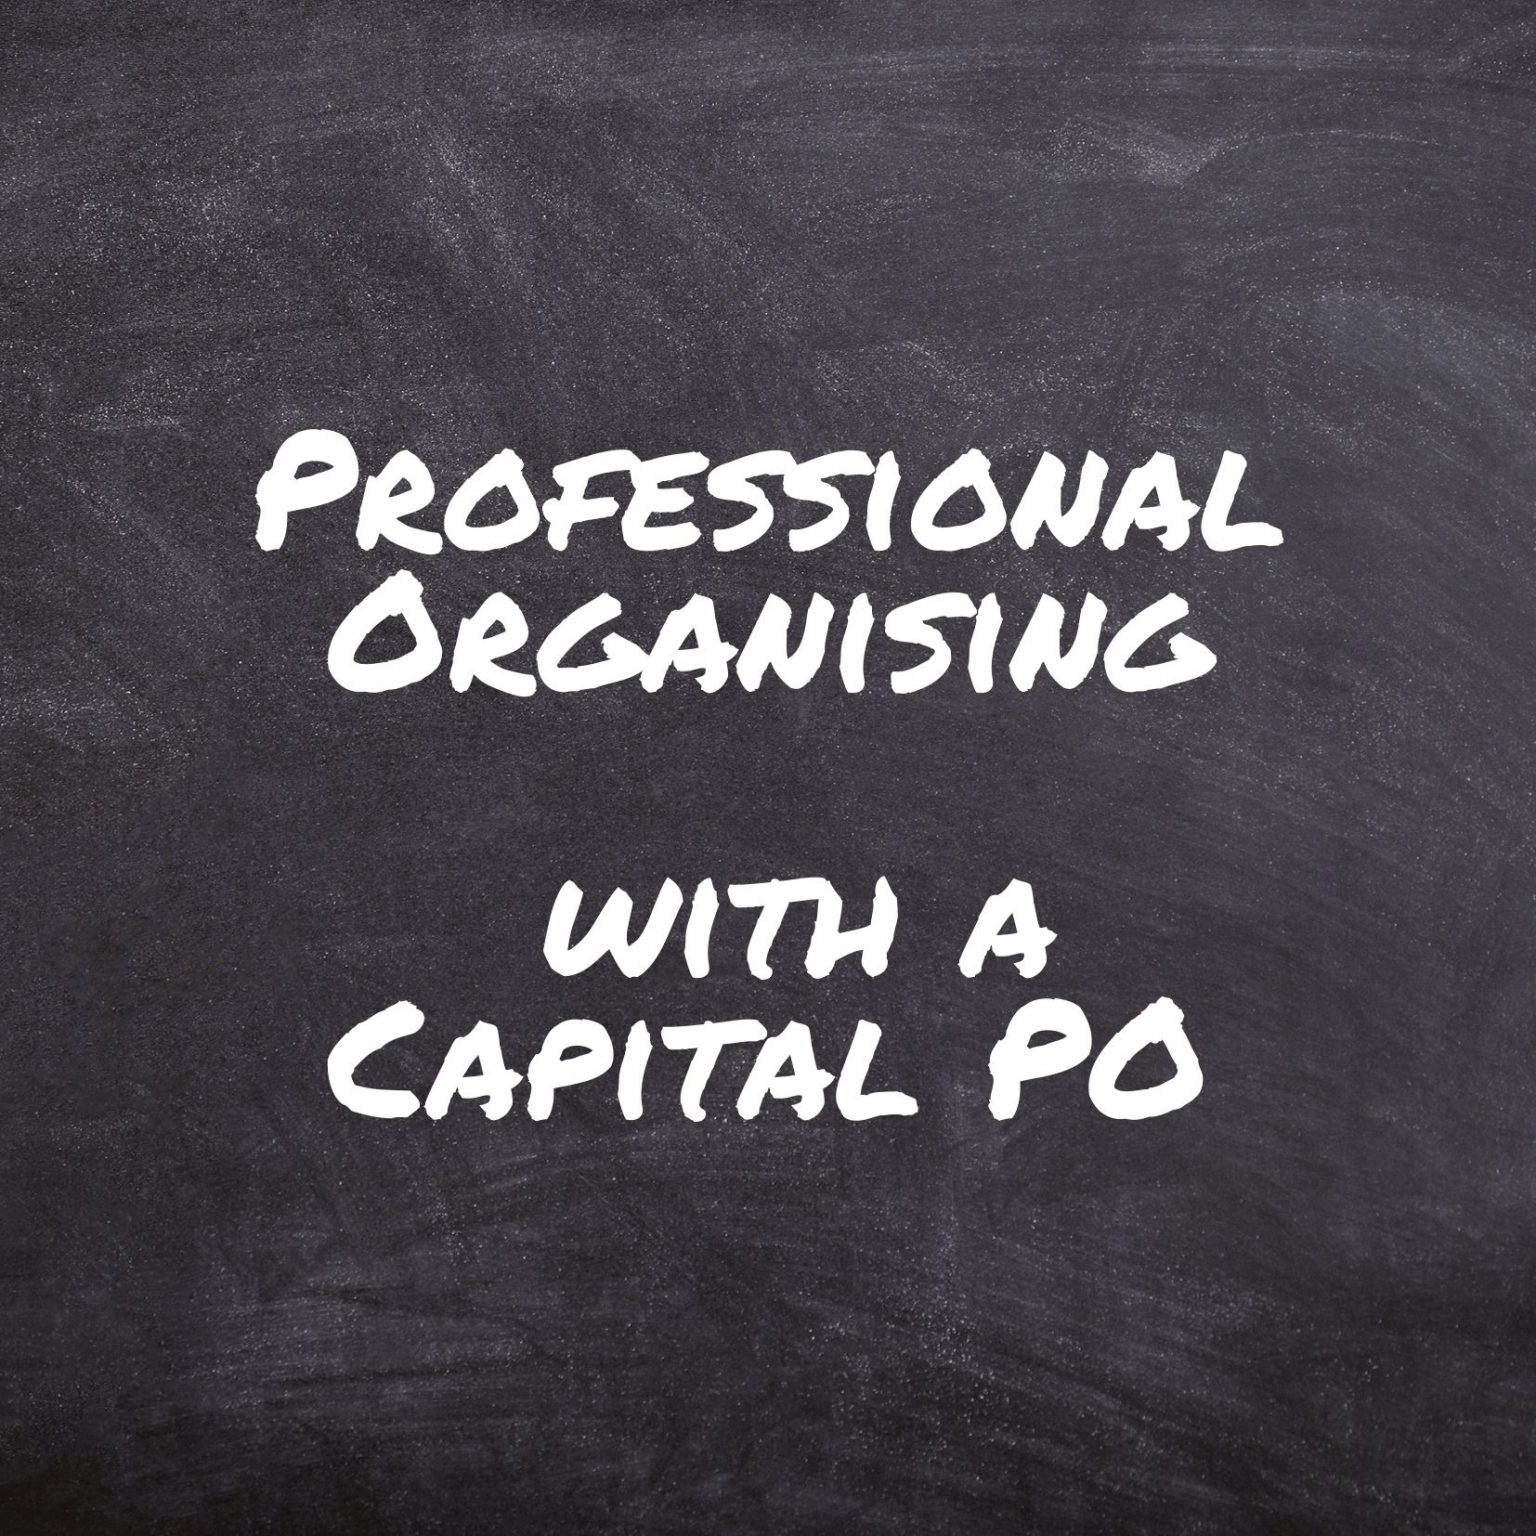 Professional Organising with a Capital PO